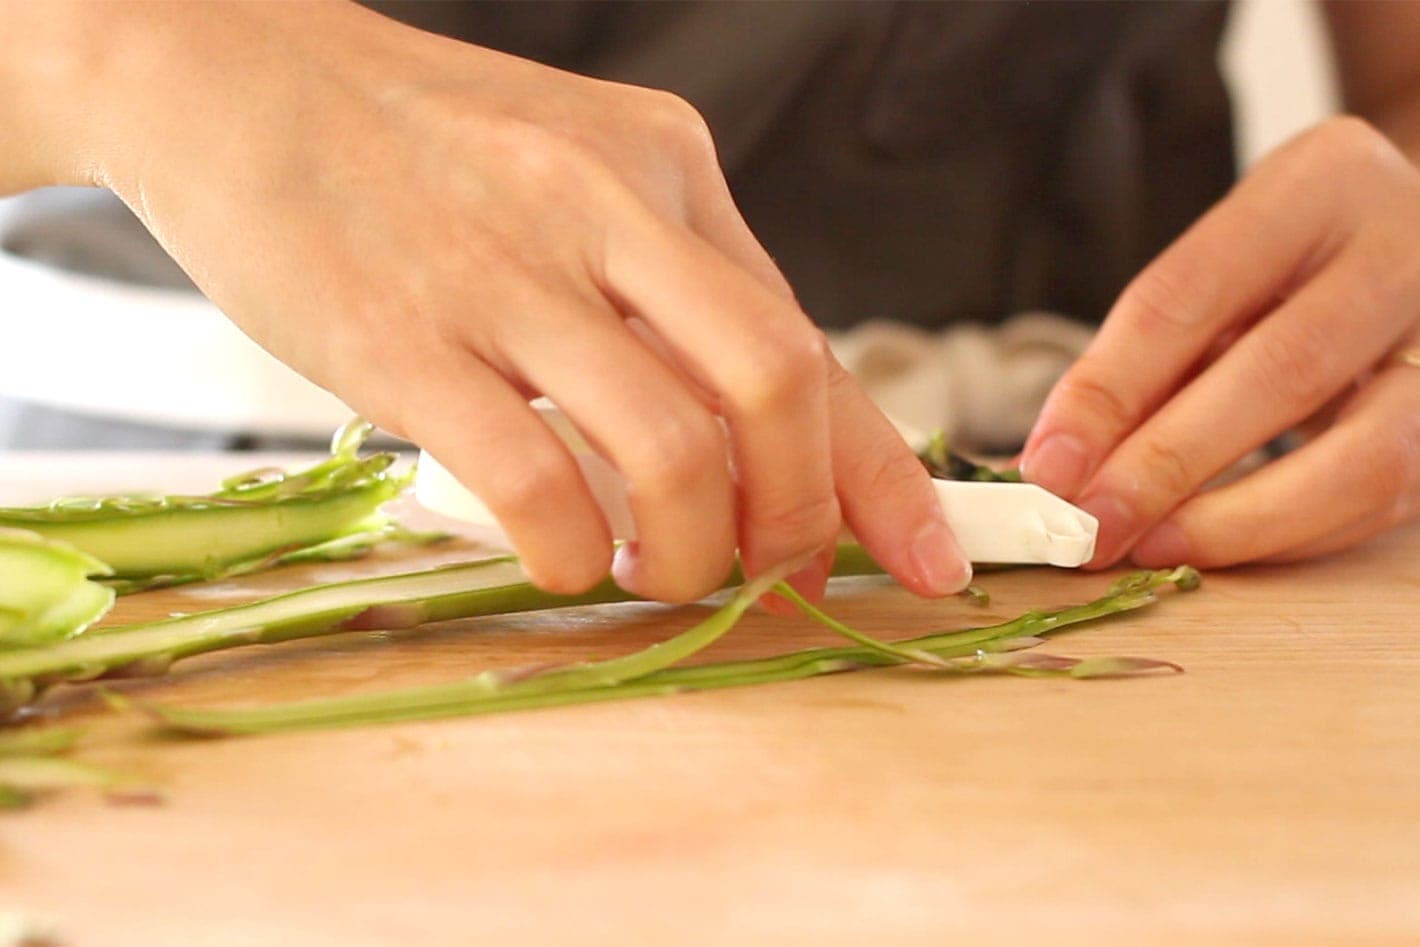 Raw asparagus on a wood cutting board being shaved into thin strips with a white vegetable peeler.